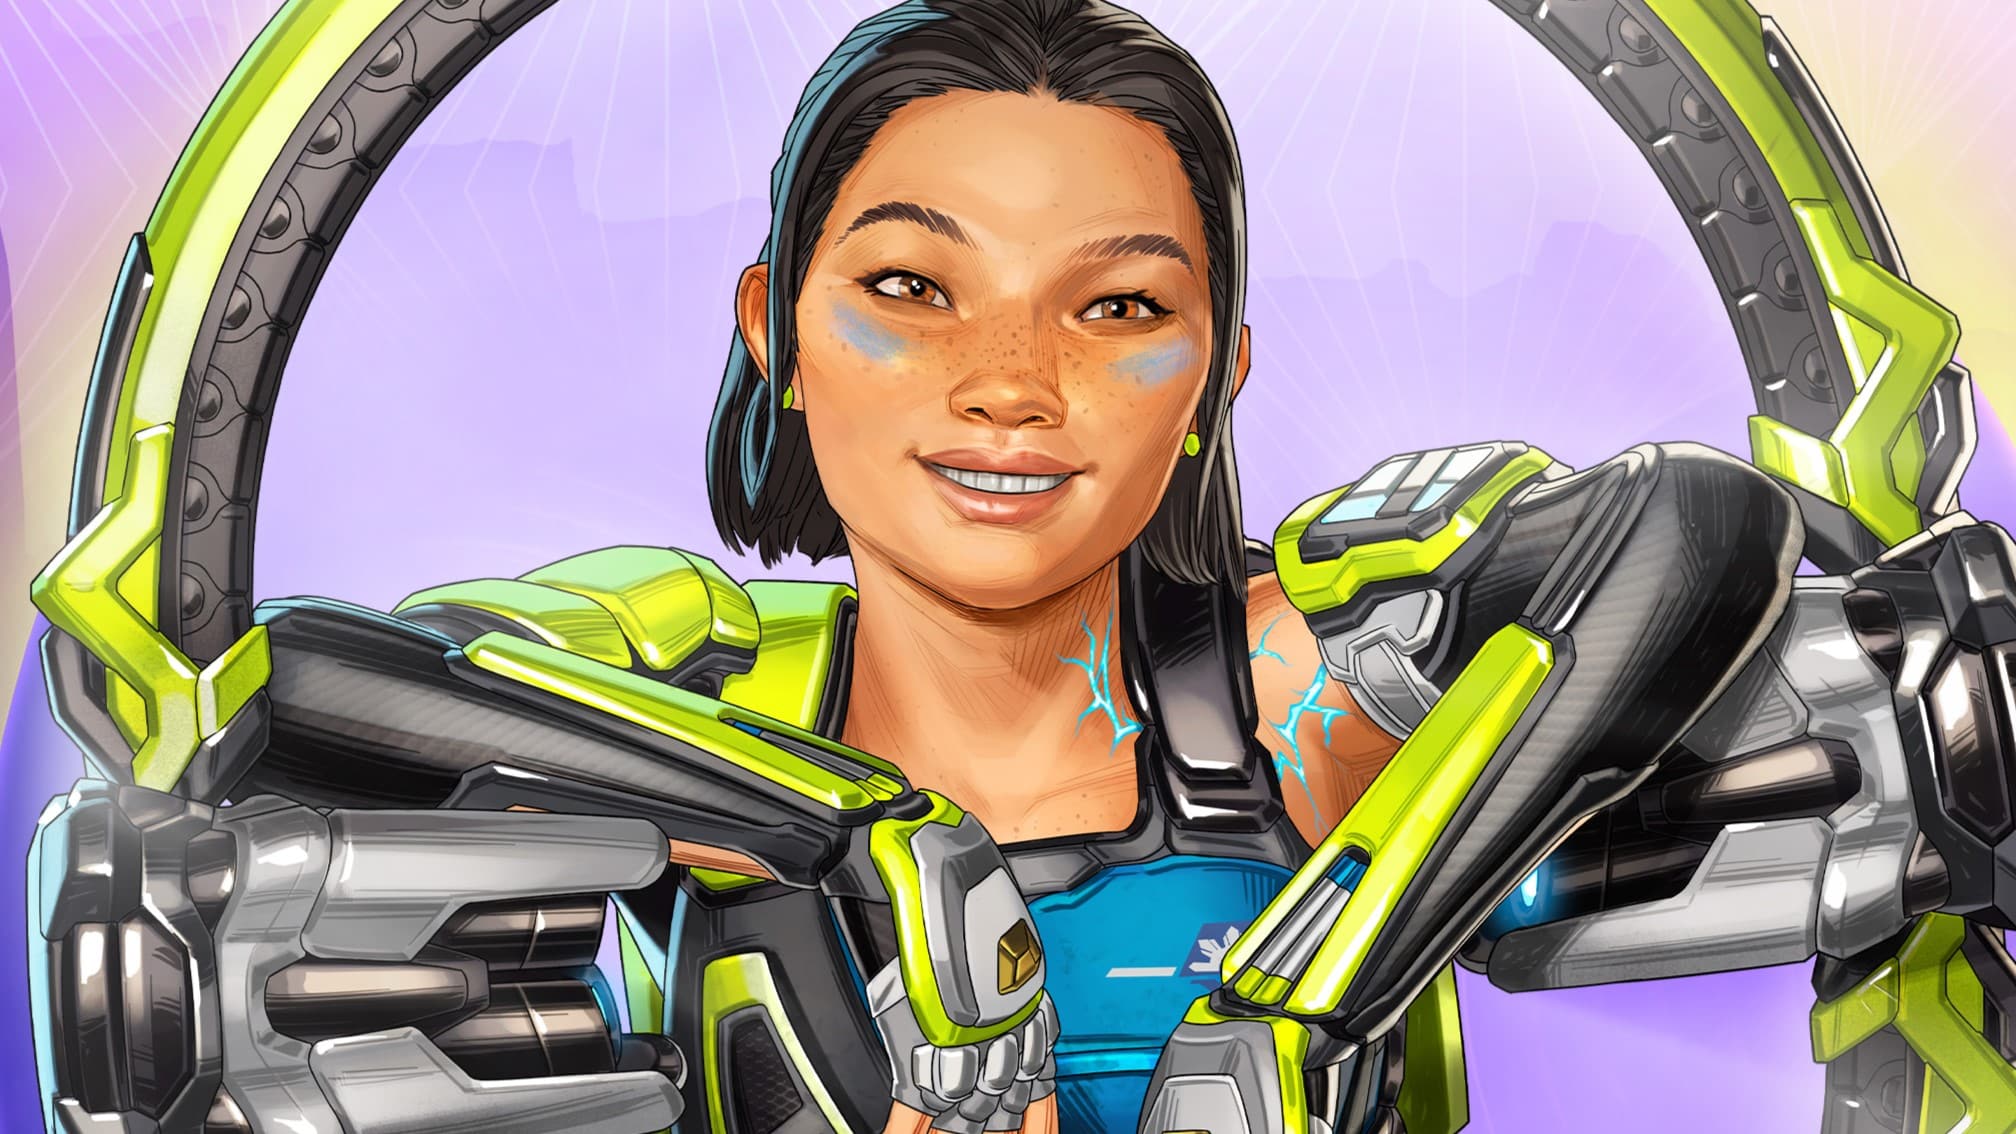 Crossplay and new event October 6 - Apex legends! 